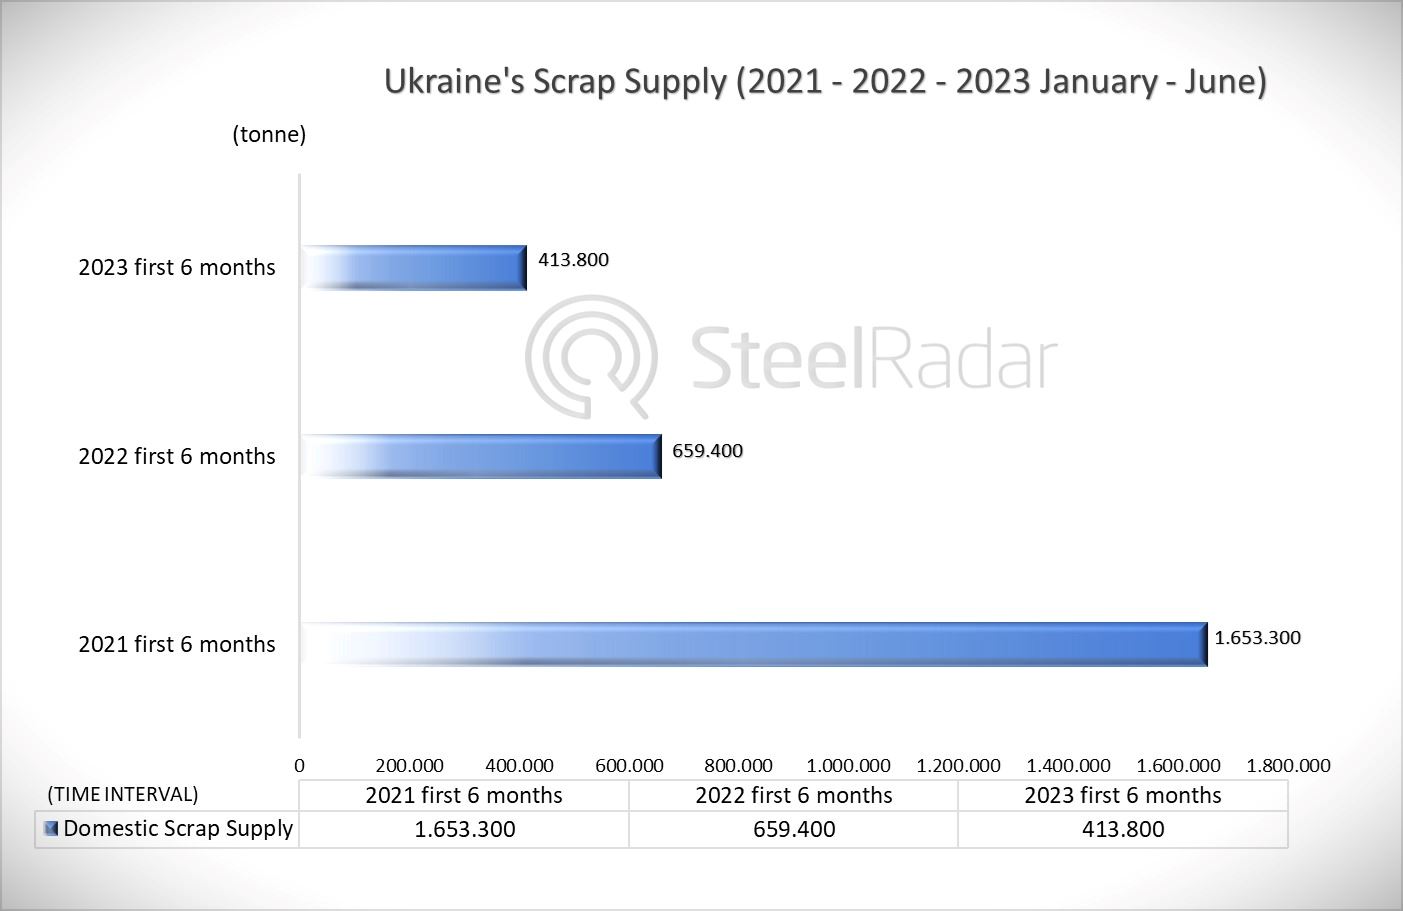 Ukraine's domestic scrap supply decreased by 60% in the first half of 2023